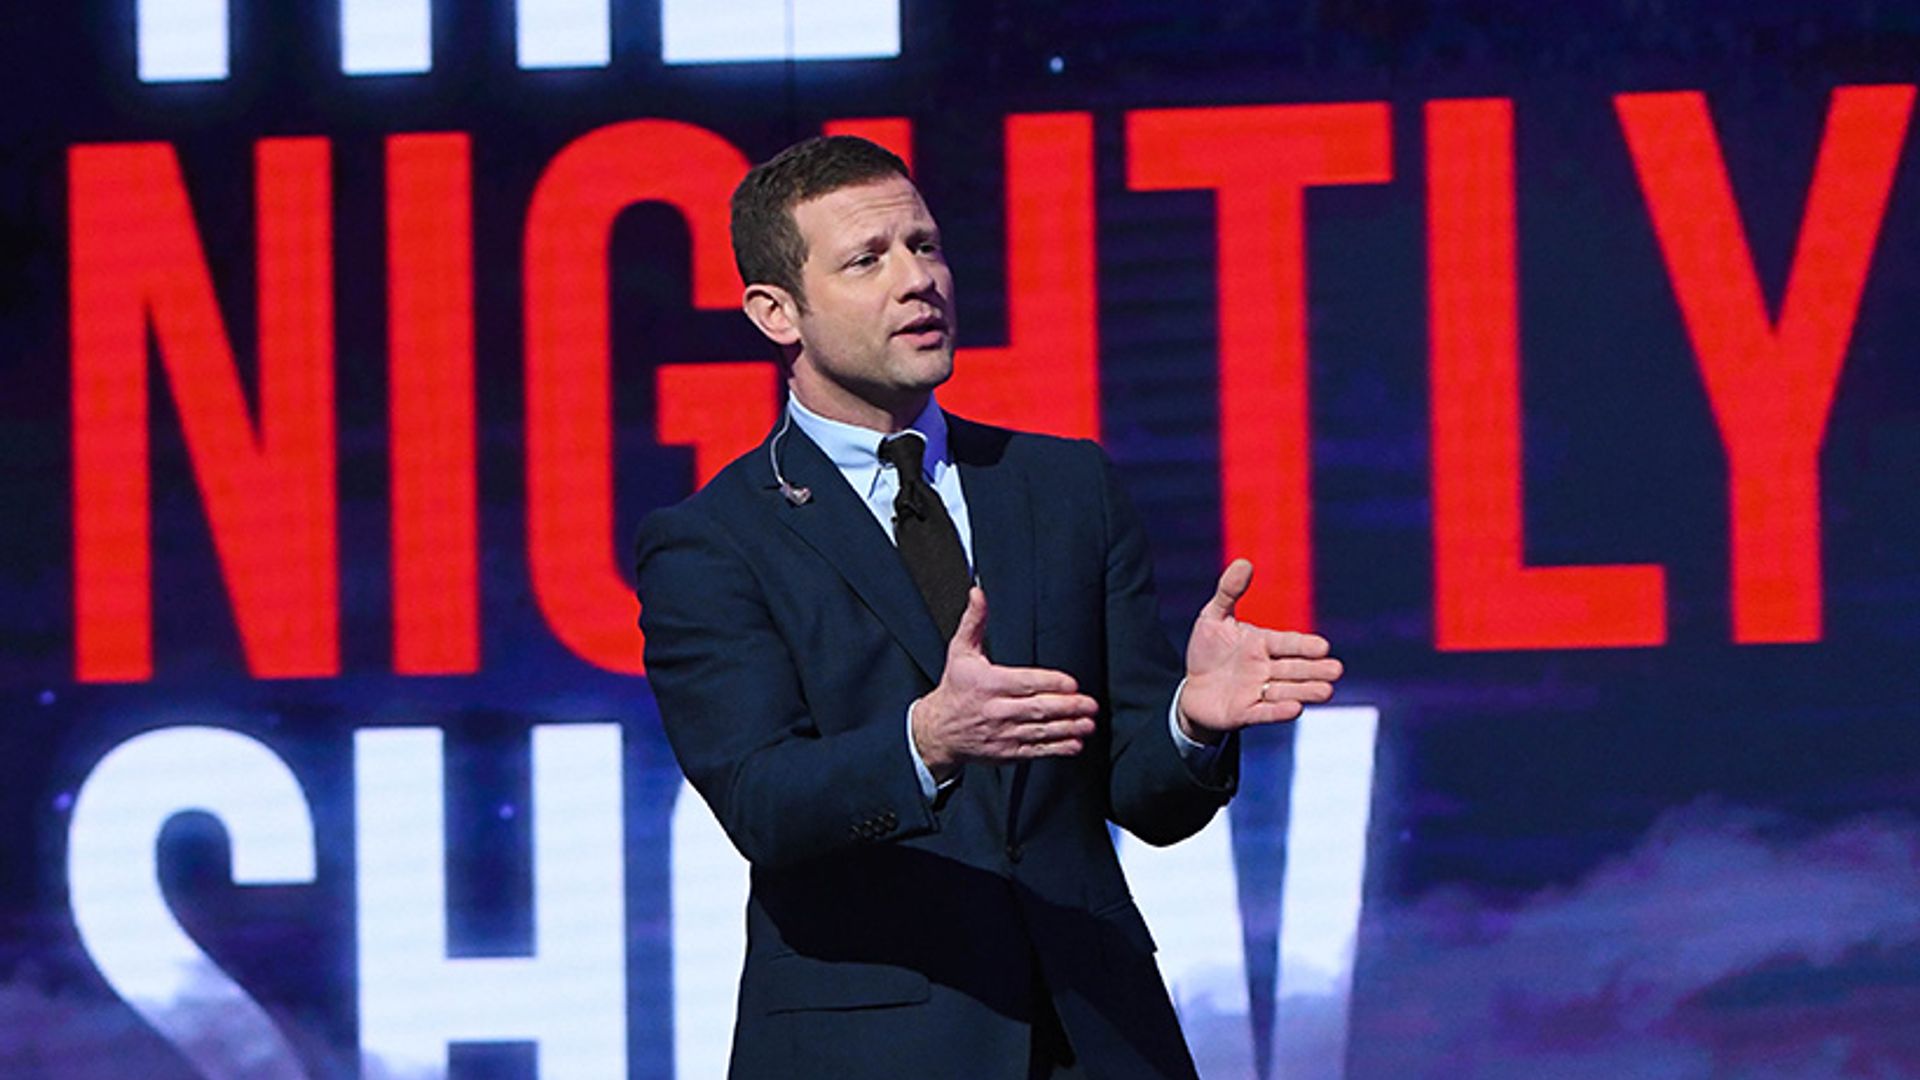 Dermot O'Leary pays moving tribute to London following Westminster terror attacks